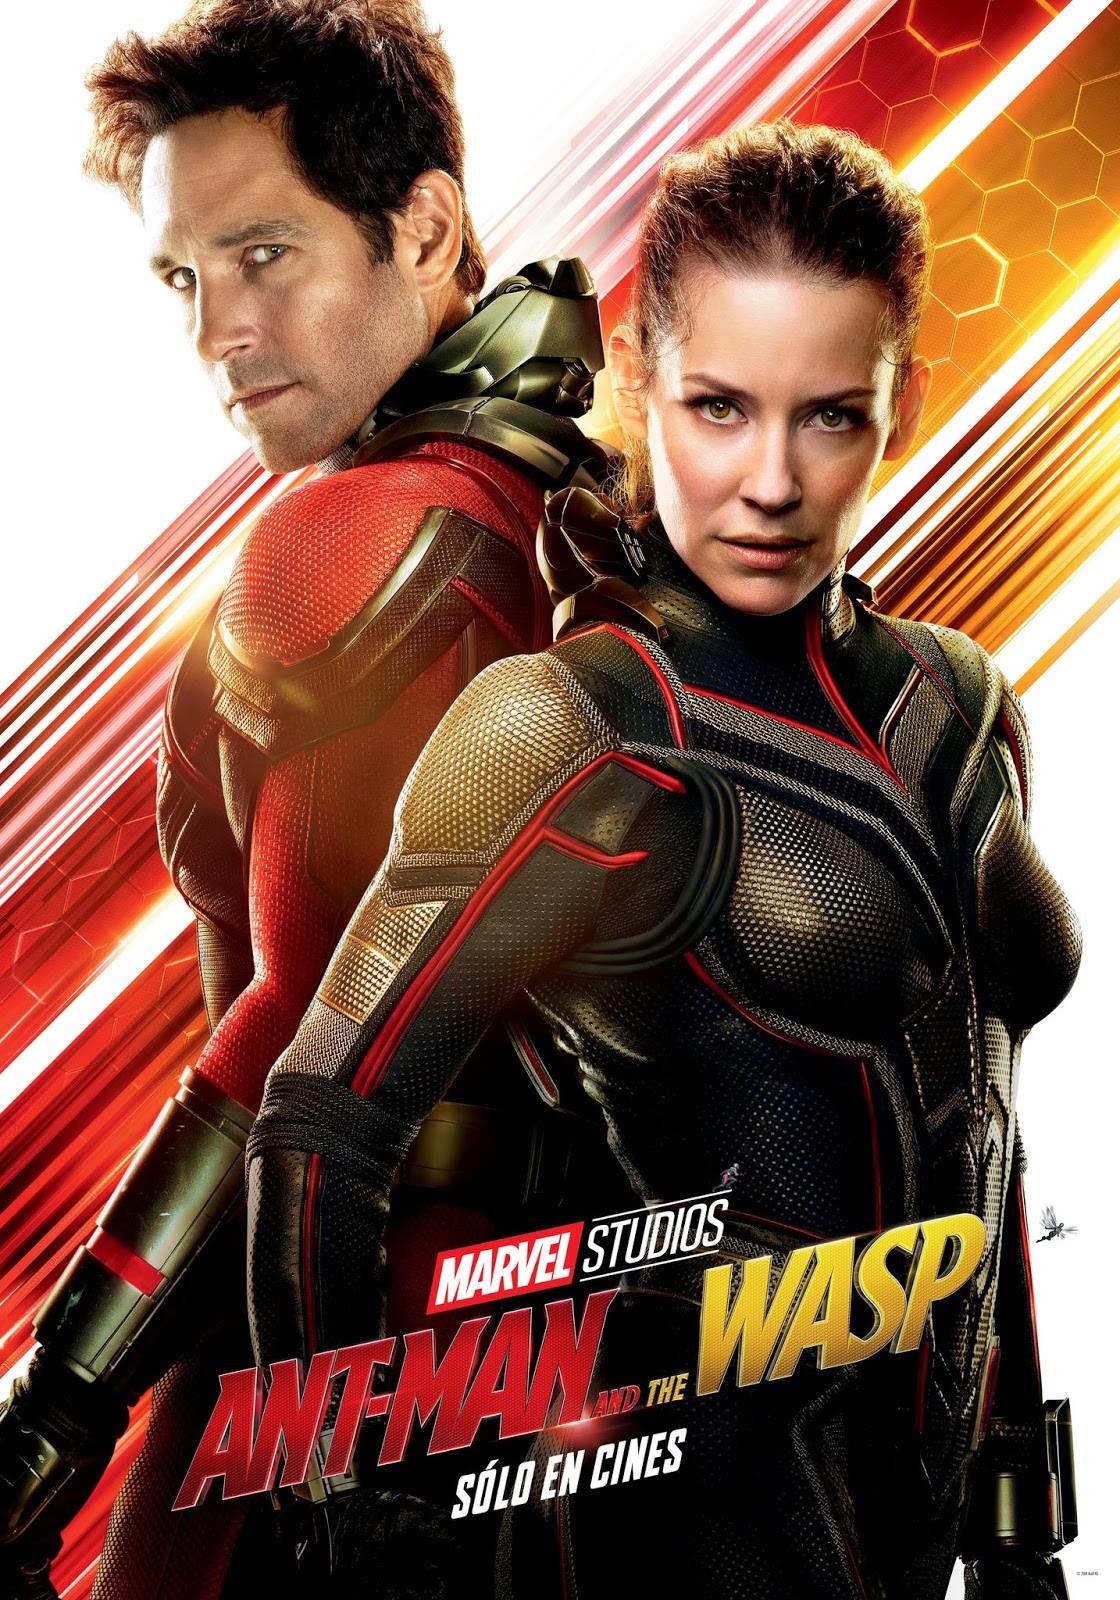 Ant-Man and the Wasp/Ant-Man ve Wasp